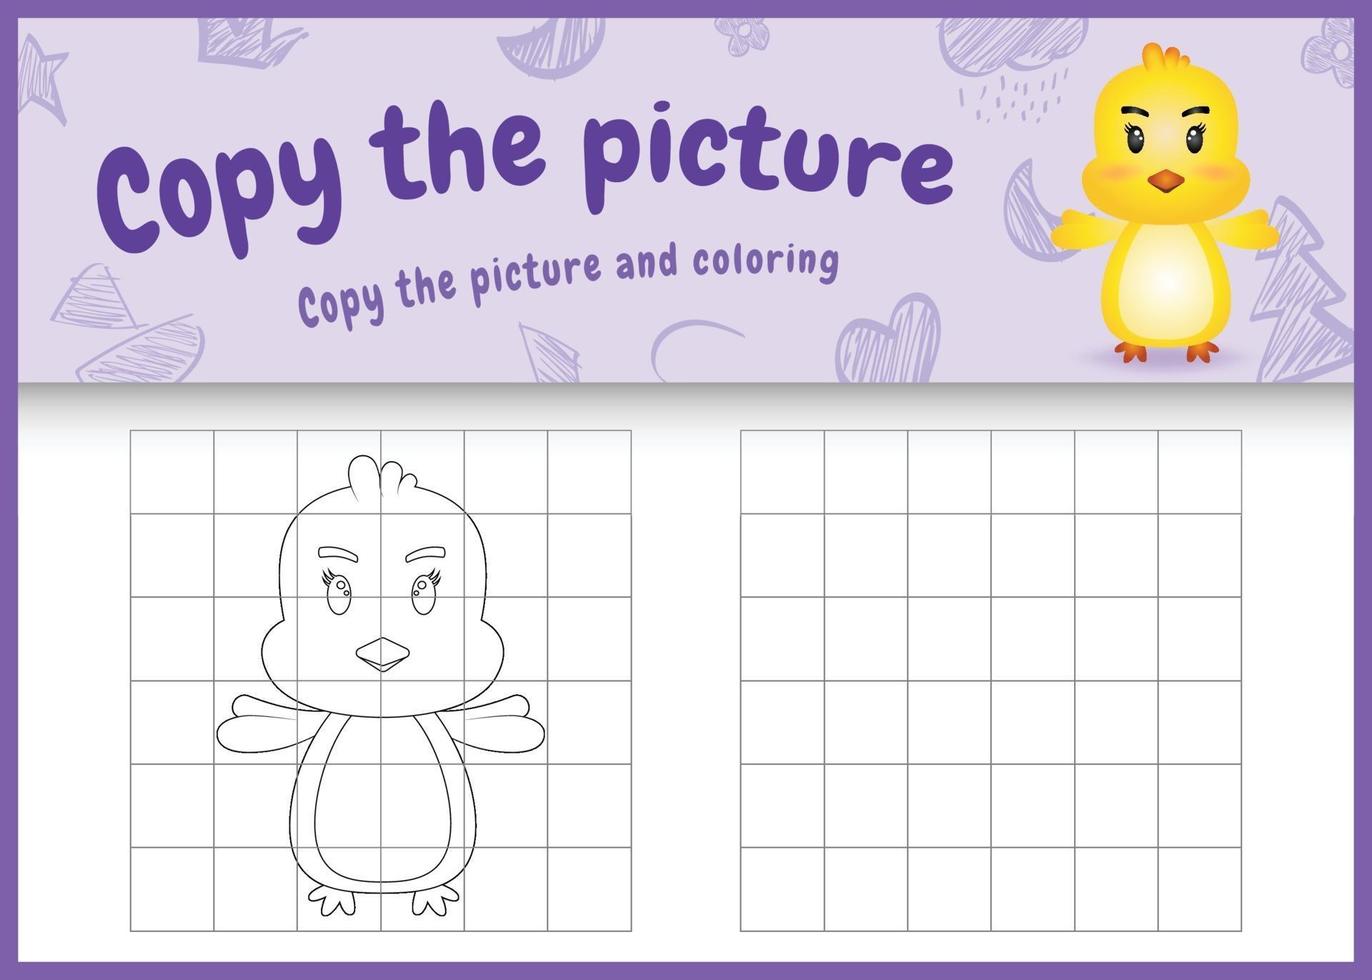 copy the picture kids game and coloring page with a cute chick character illustration vector